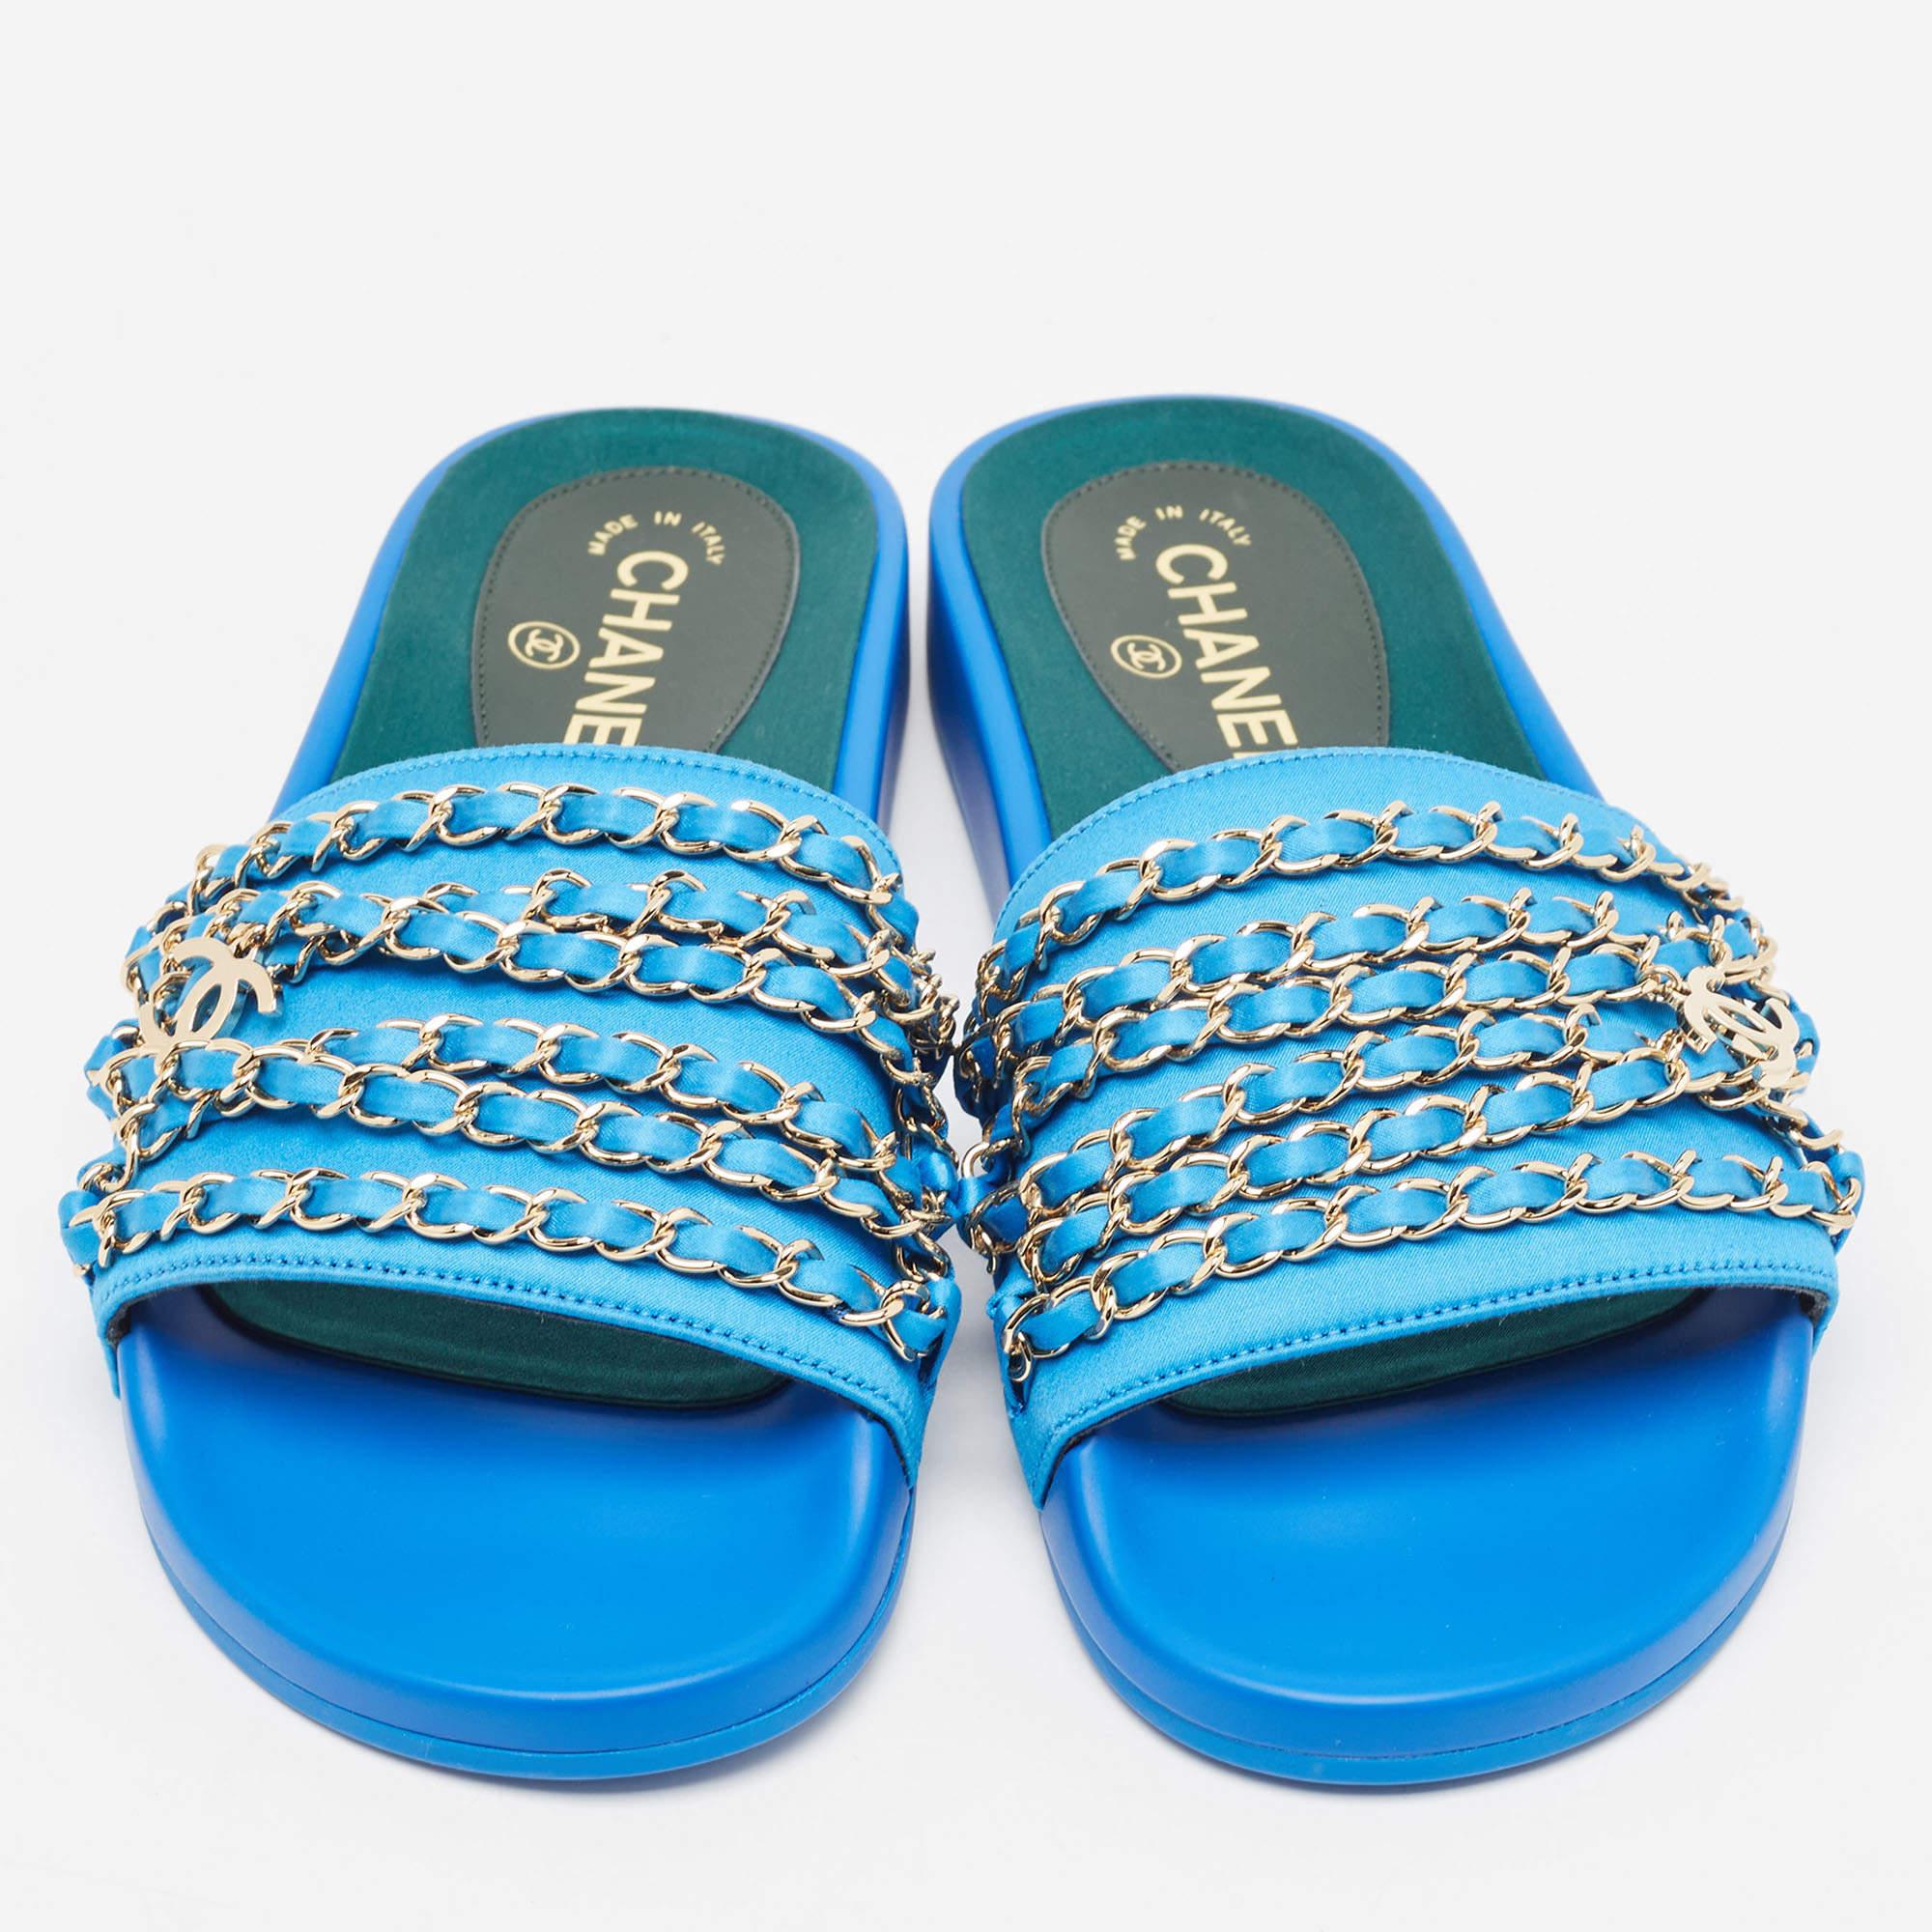 These Tropiconic slides by Chanel are unmistakably luxe. The vamps with chain detail feature the iconic interlocking CC charm accent for a signature touch.

Includes: Original Dustbag, Original Box, Info Booklet

